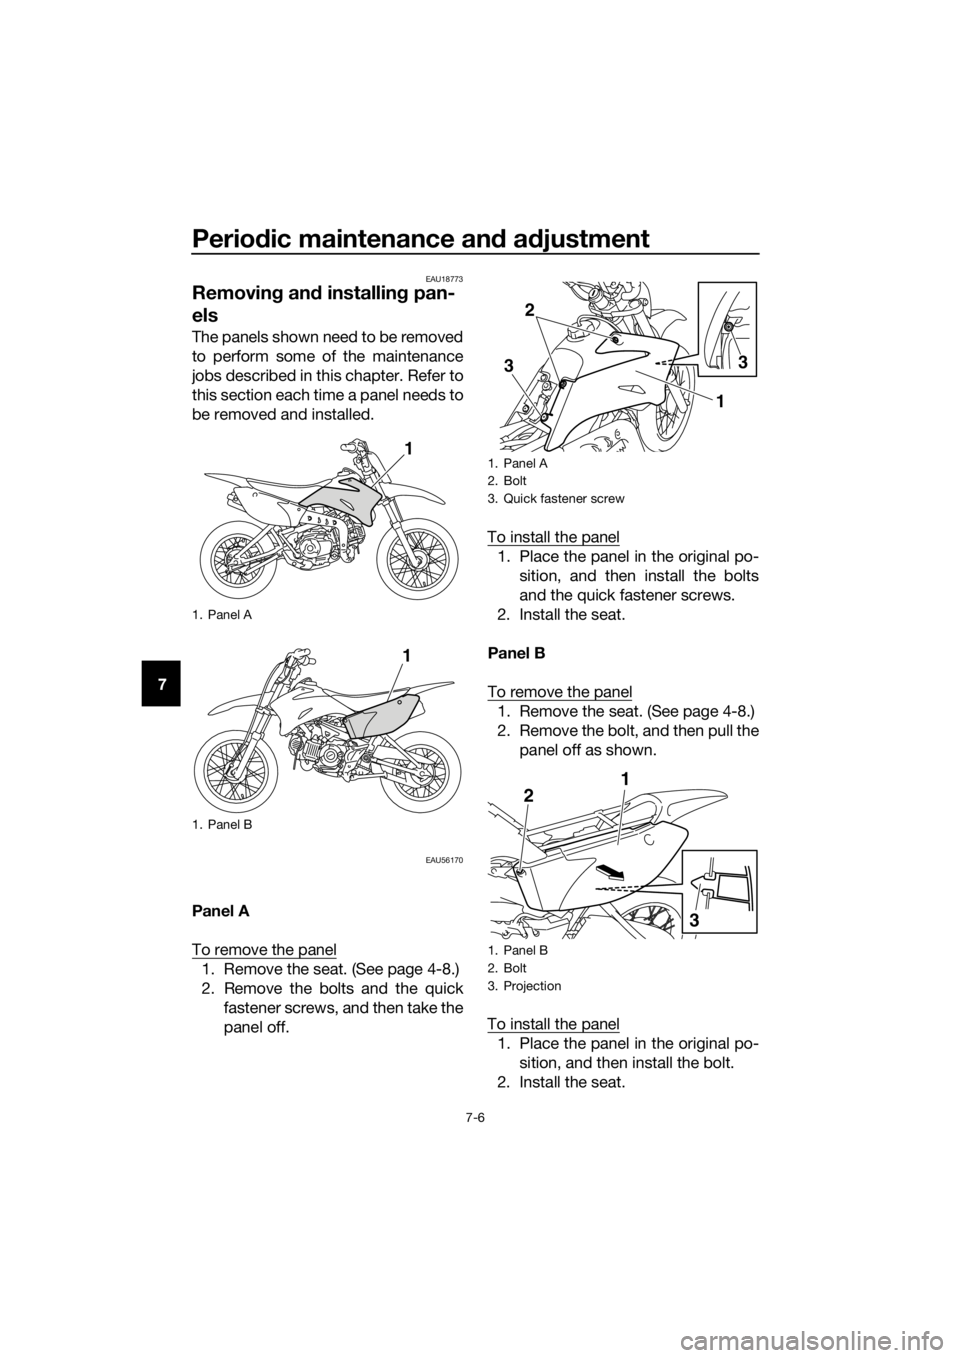 YAMAHA TT-R110E 2018 Service Manual Periodic maintenance an d a djustment
7-6
7
EAU18773
Removin g an d installin g pan-
els
The panels shown need to be removed
to perform some of the maintenance
jobs described in this chapter. Refer to